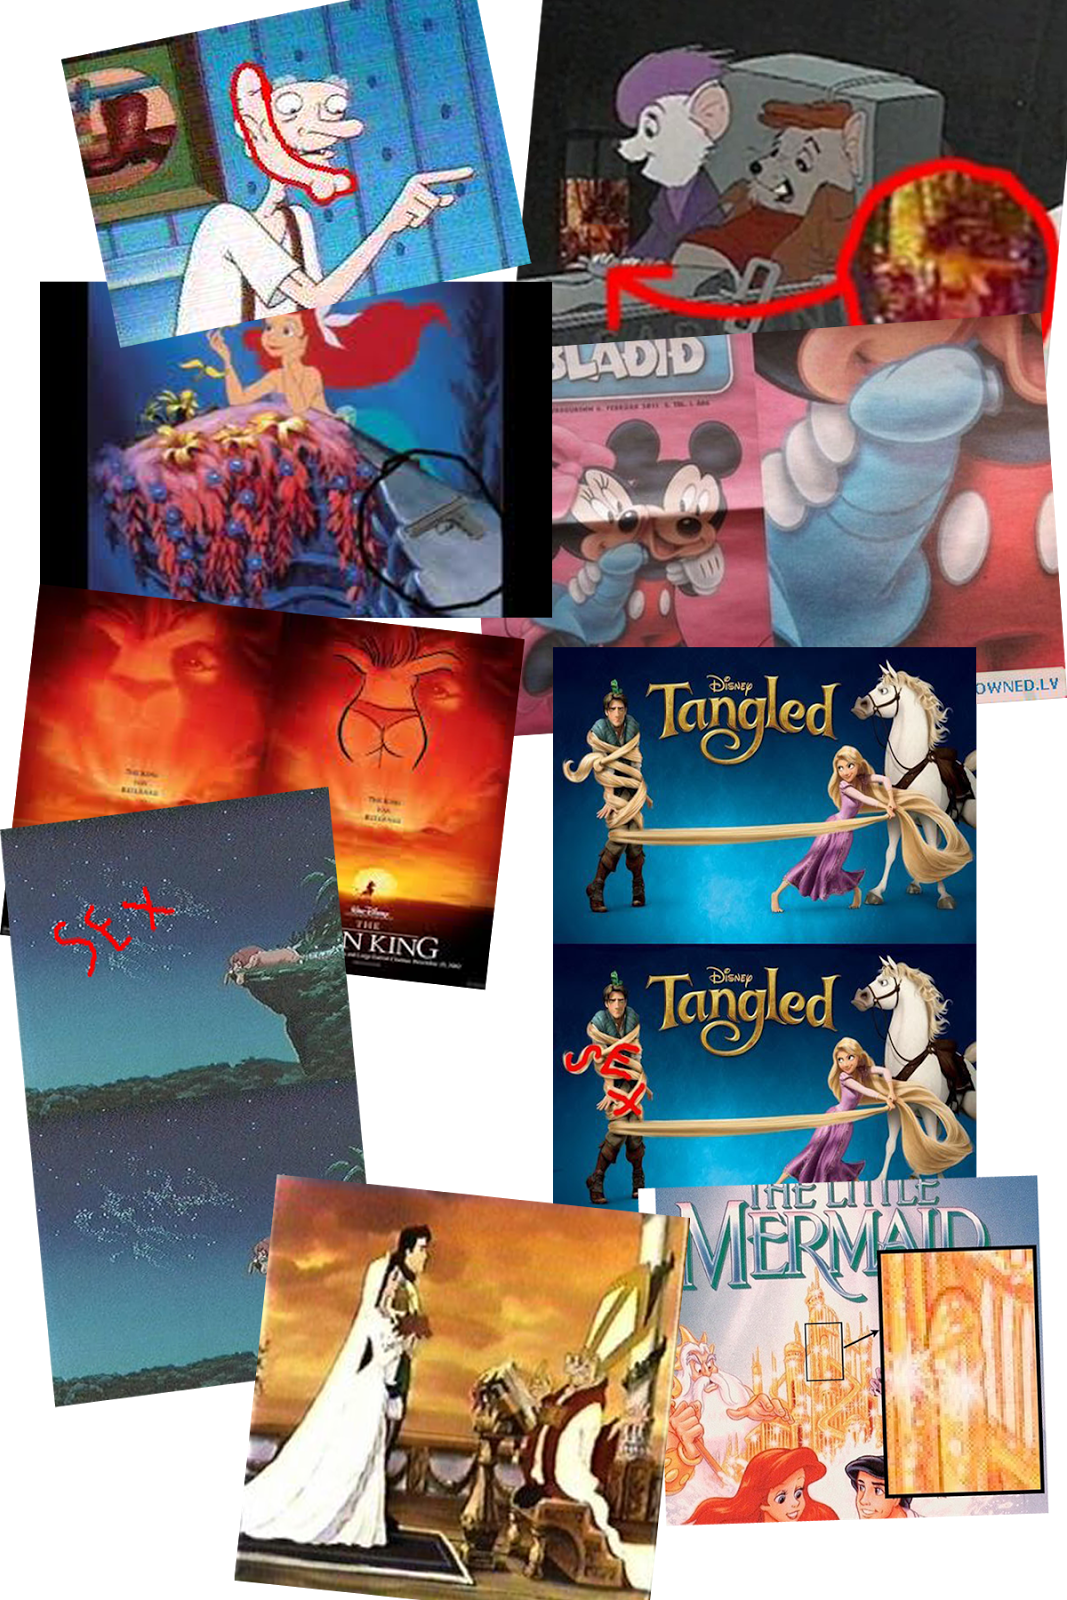 Random Thoughts Subliminal Messages From Disney